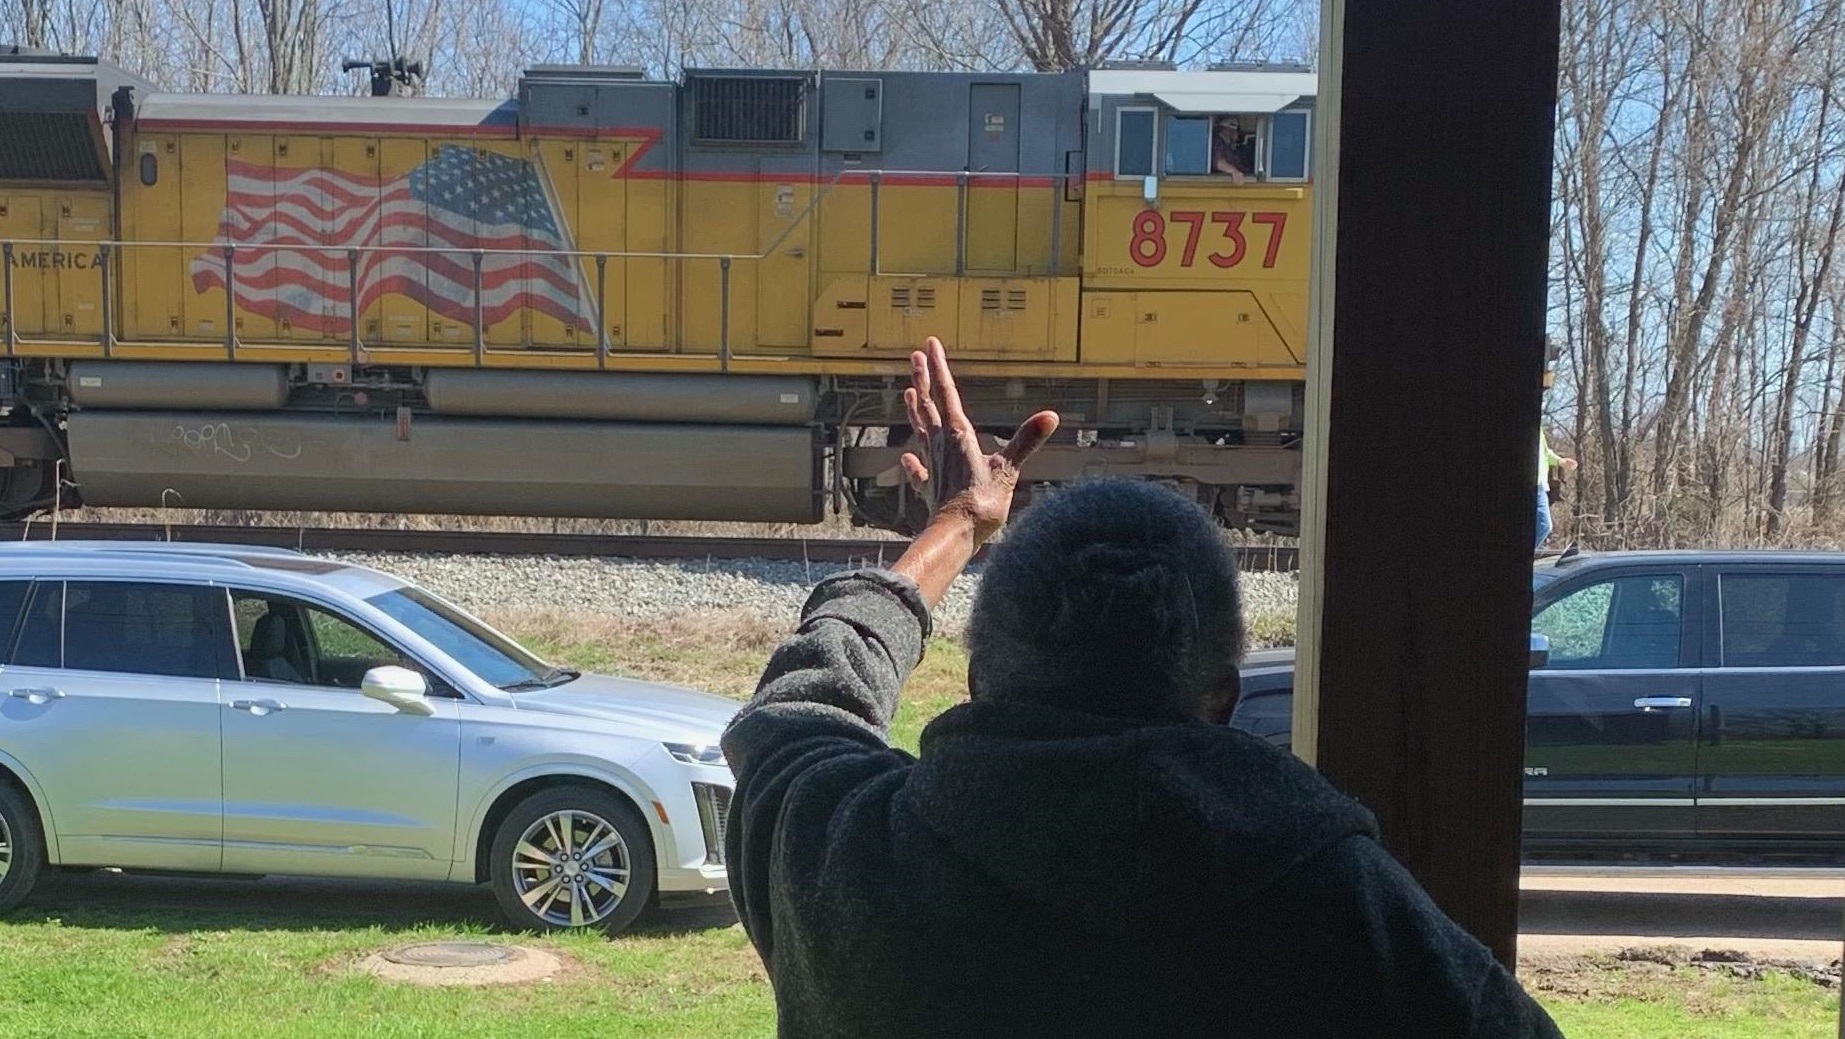 McGehee, Arkansas, woman waves at a passing train from her home.